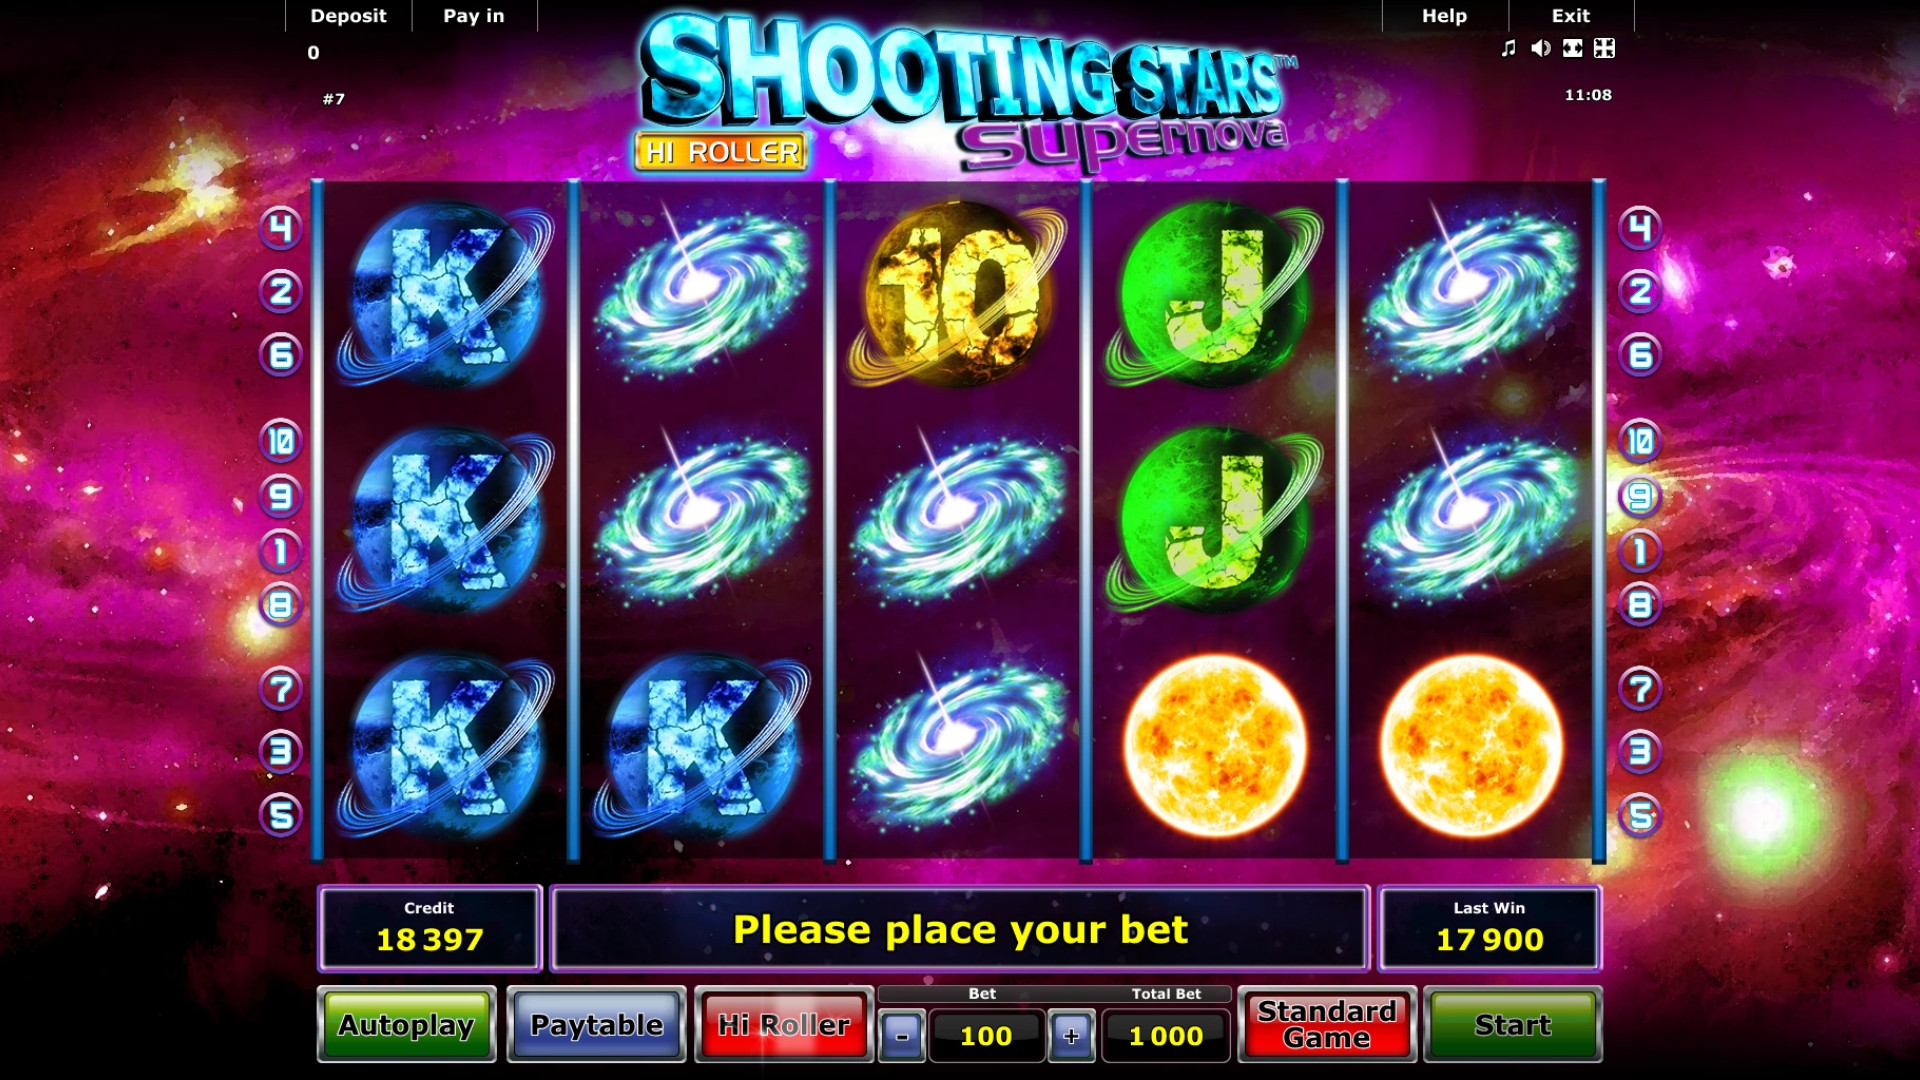 Shooting Stars Supernova (Shooting Stars Supernova) from category Slots